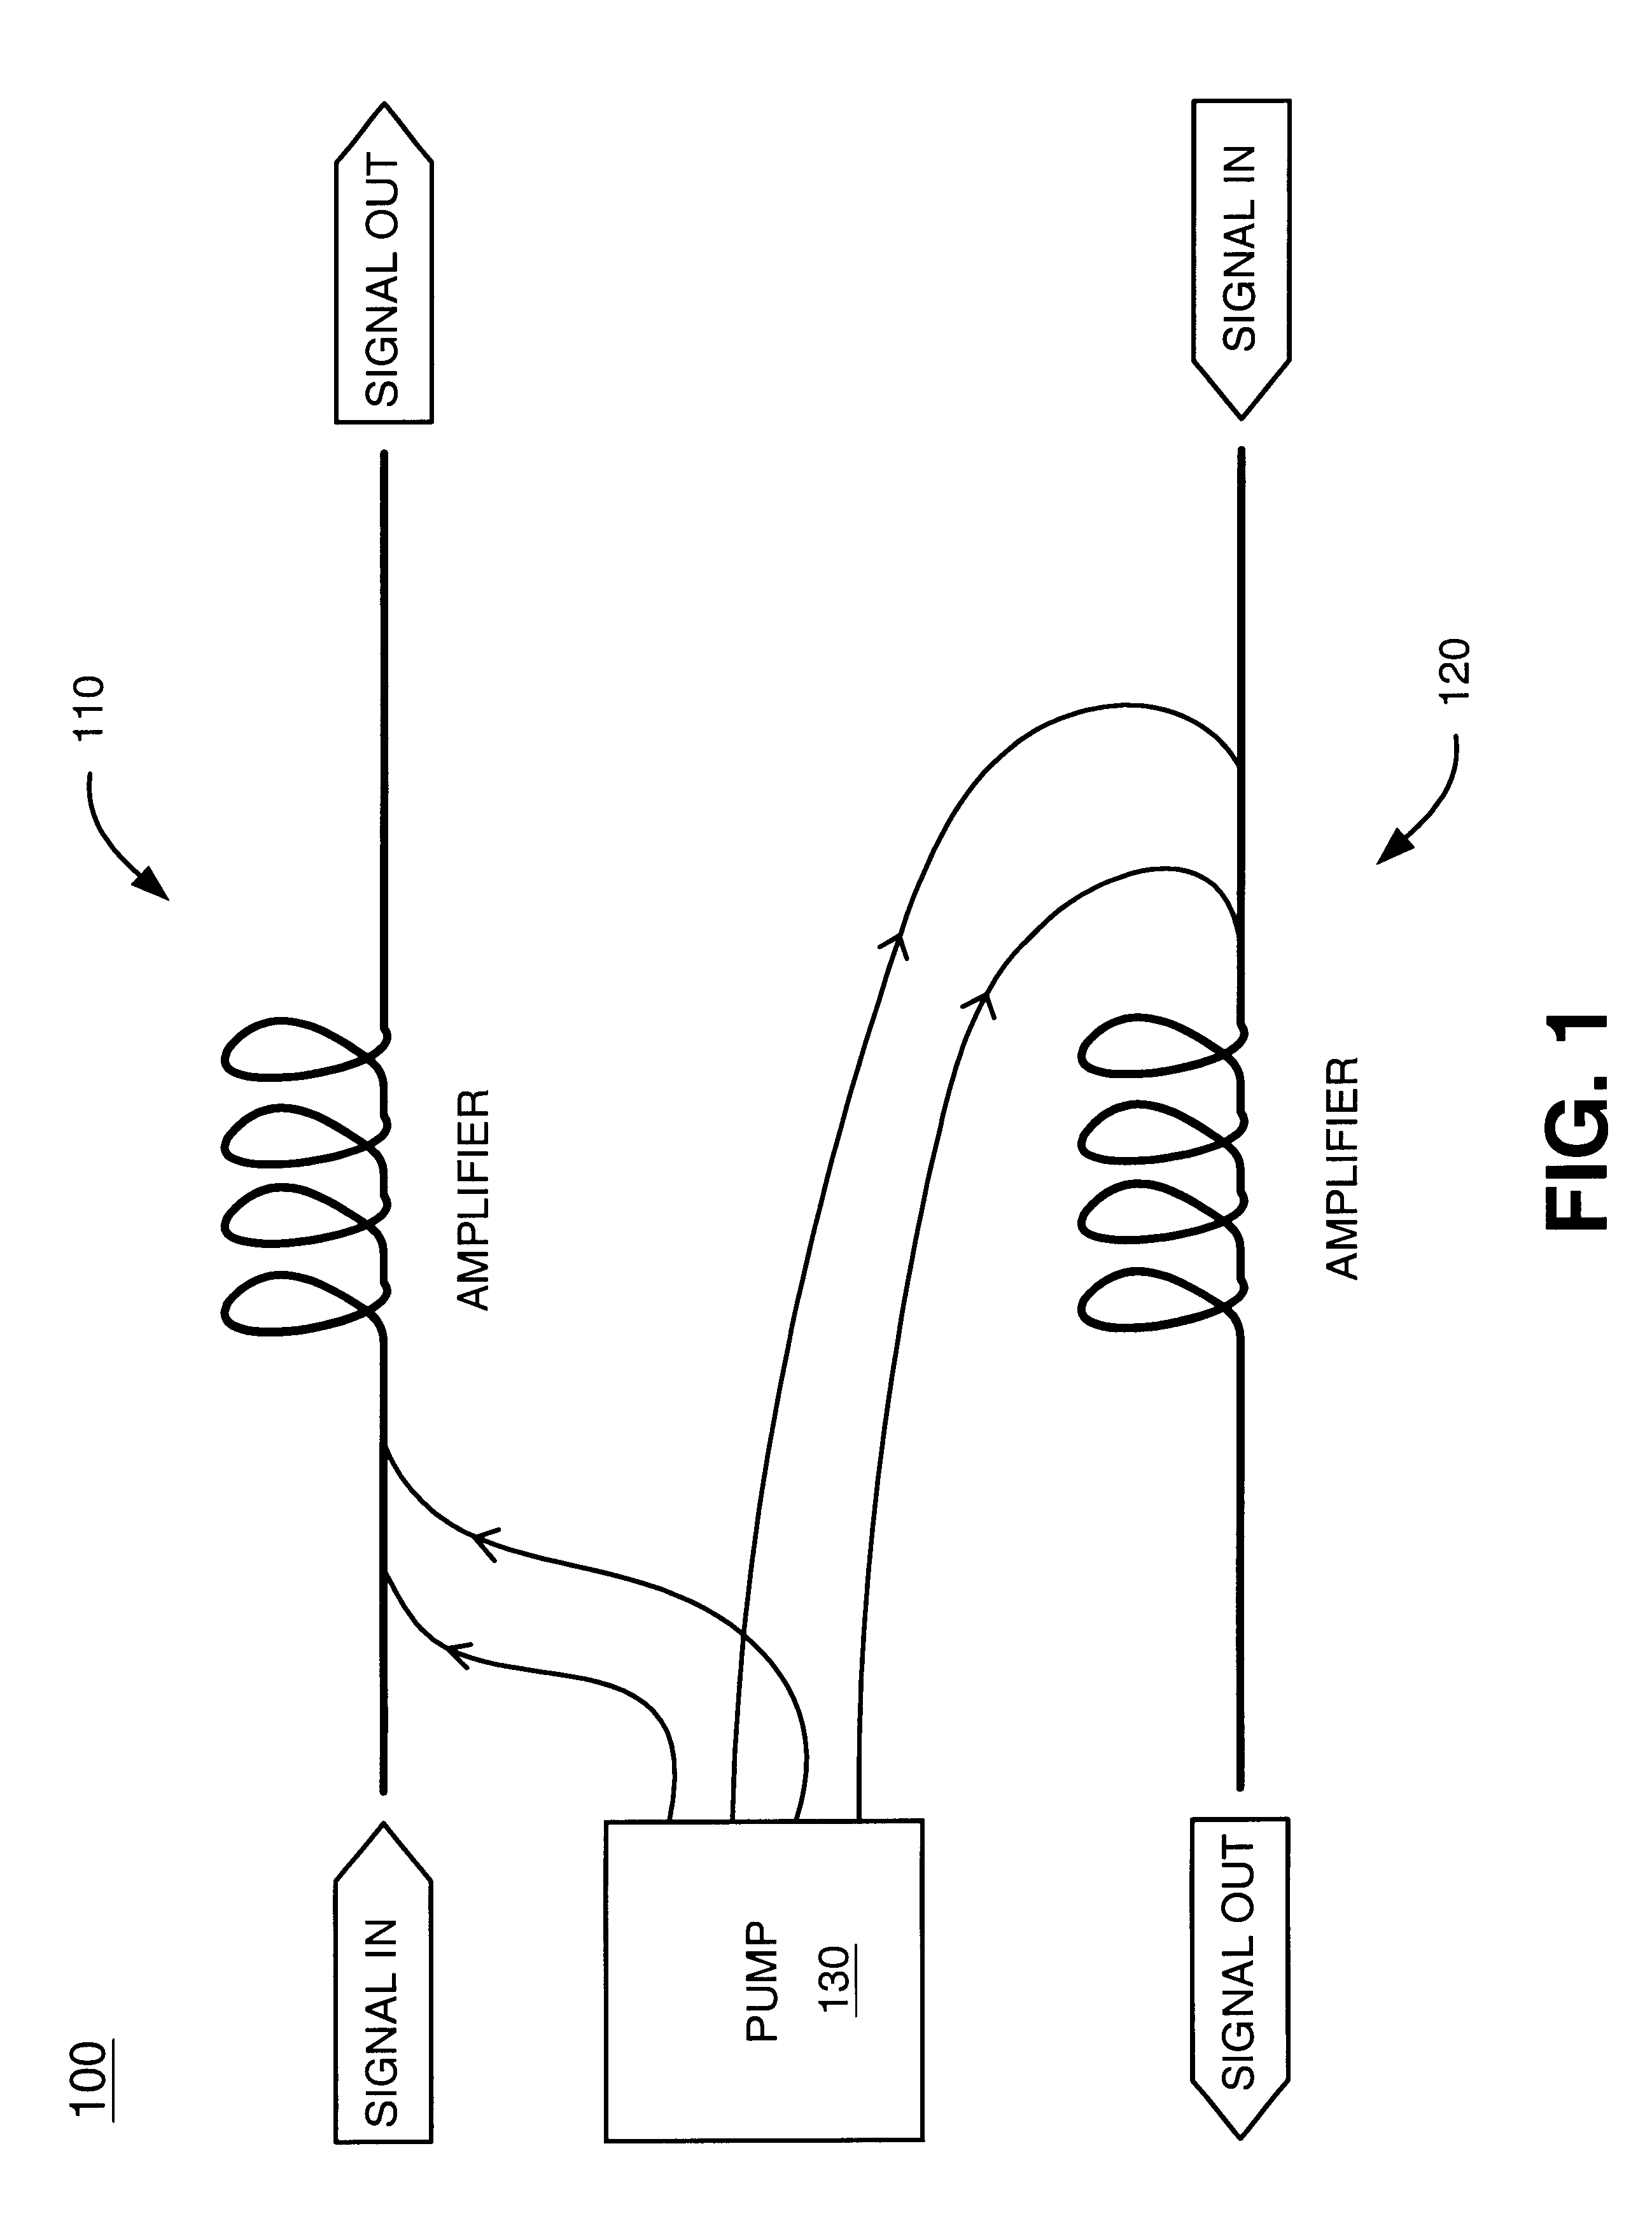 Systems and methods for detecting fault conditions and detecting and preventing potentially dangerous conditions in an optical system